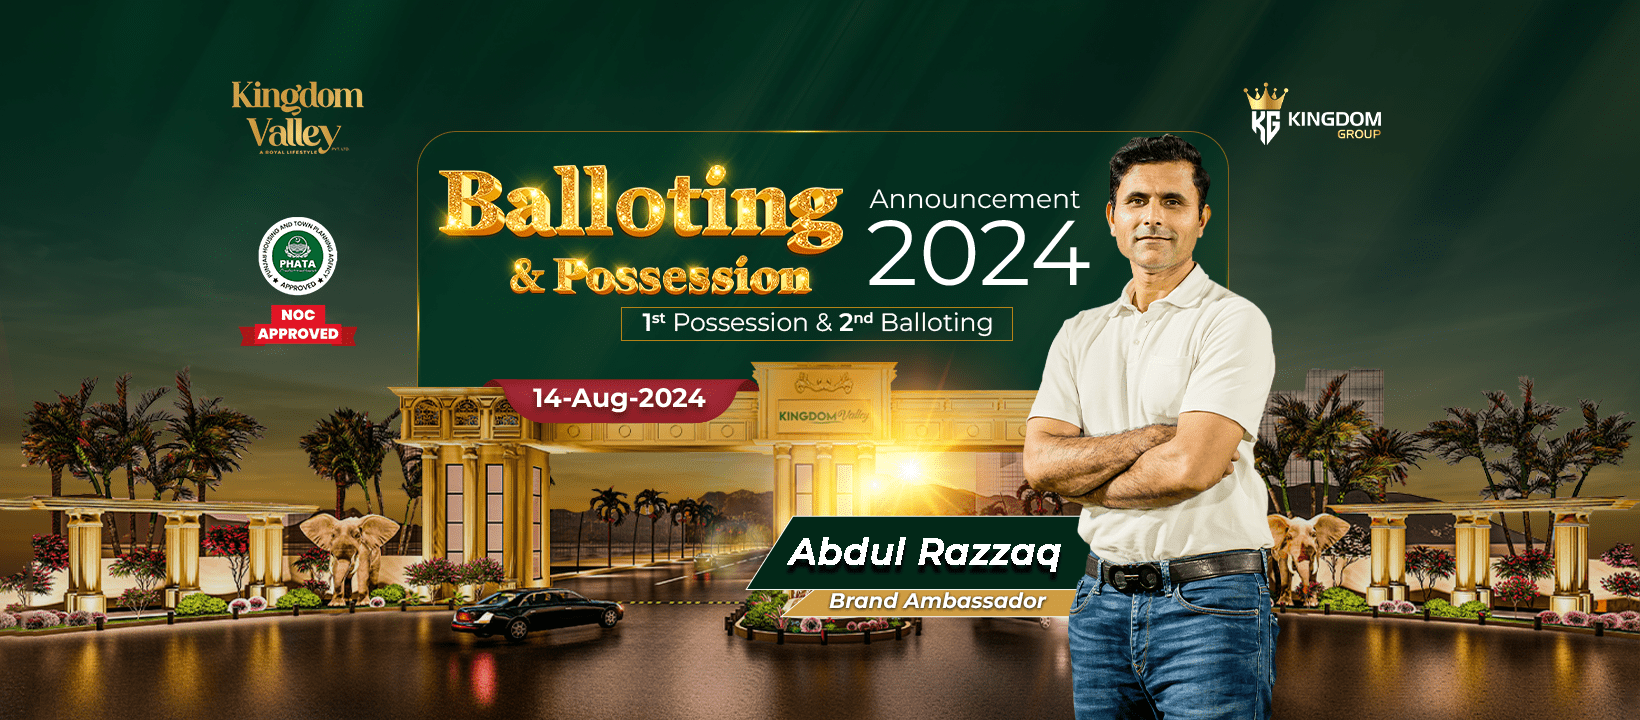 kingdom valley fb cover updated with badul razzaq